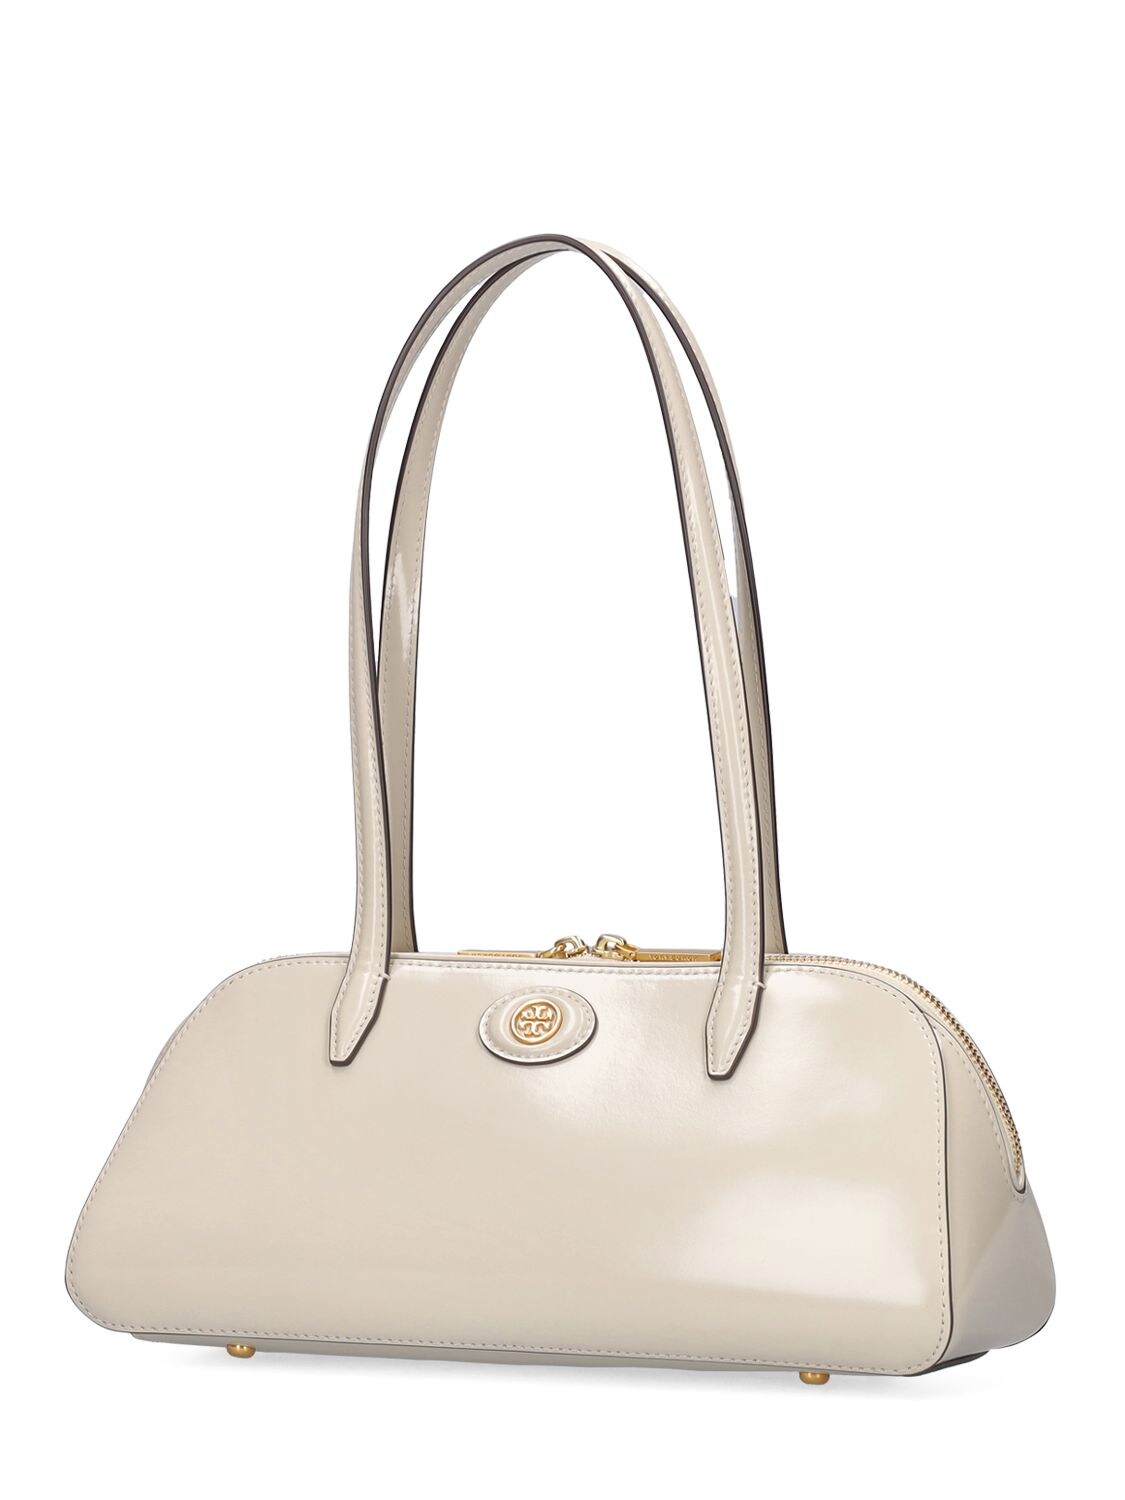 Tory Burch Small Robinson Leather Top Handle Bag in Shea Butter